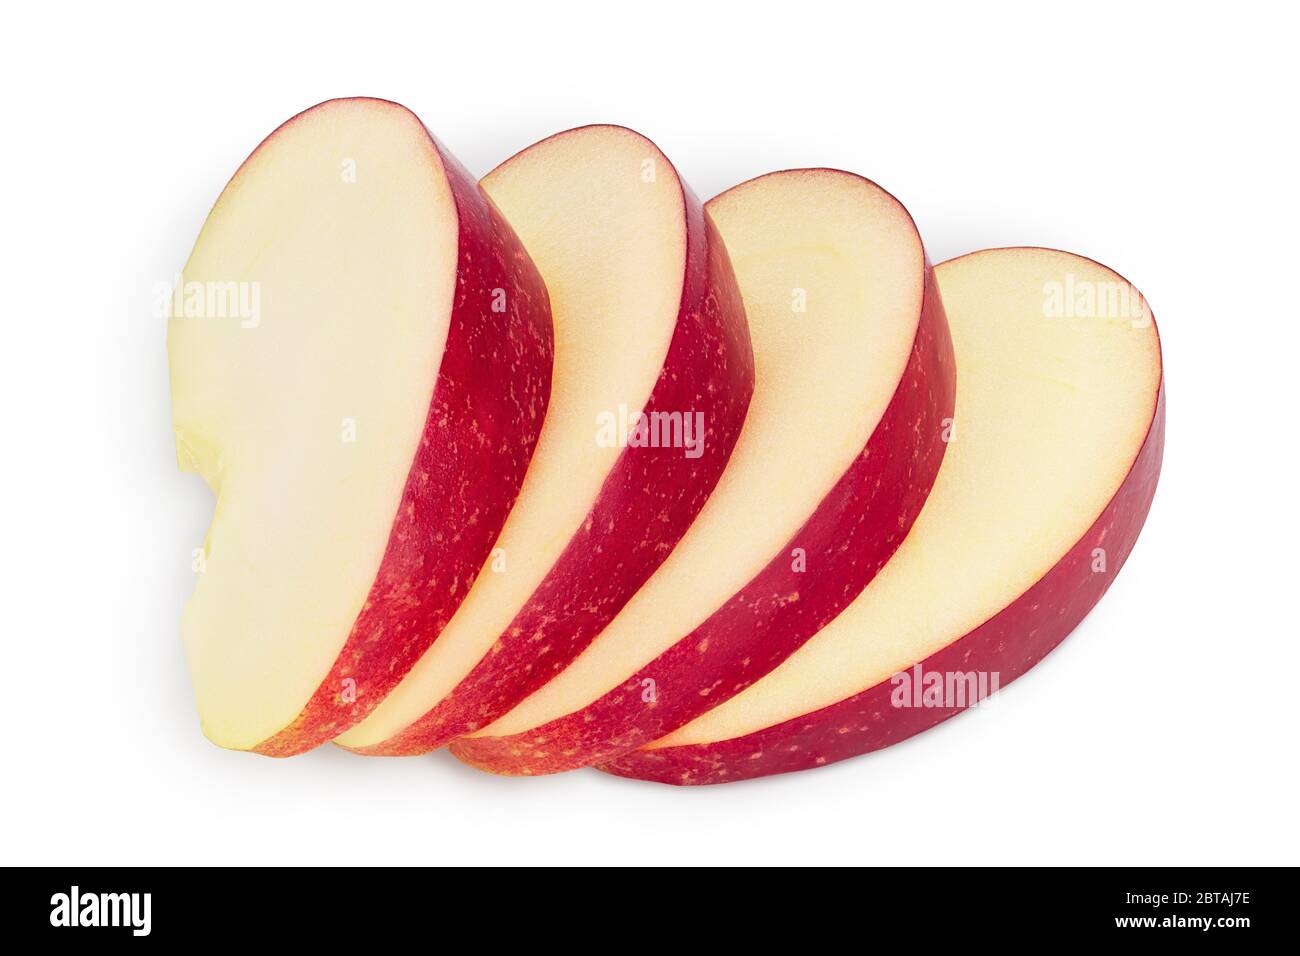 https://c8.alamy.com/comp/2BTAJ7E/red-apple-slices-isolated-on-white-background-with-clipping-path-and-full-depth-of-field-2BTAJ7E.jpg